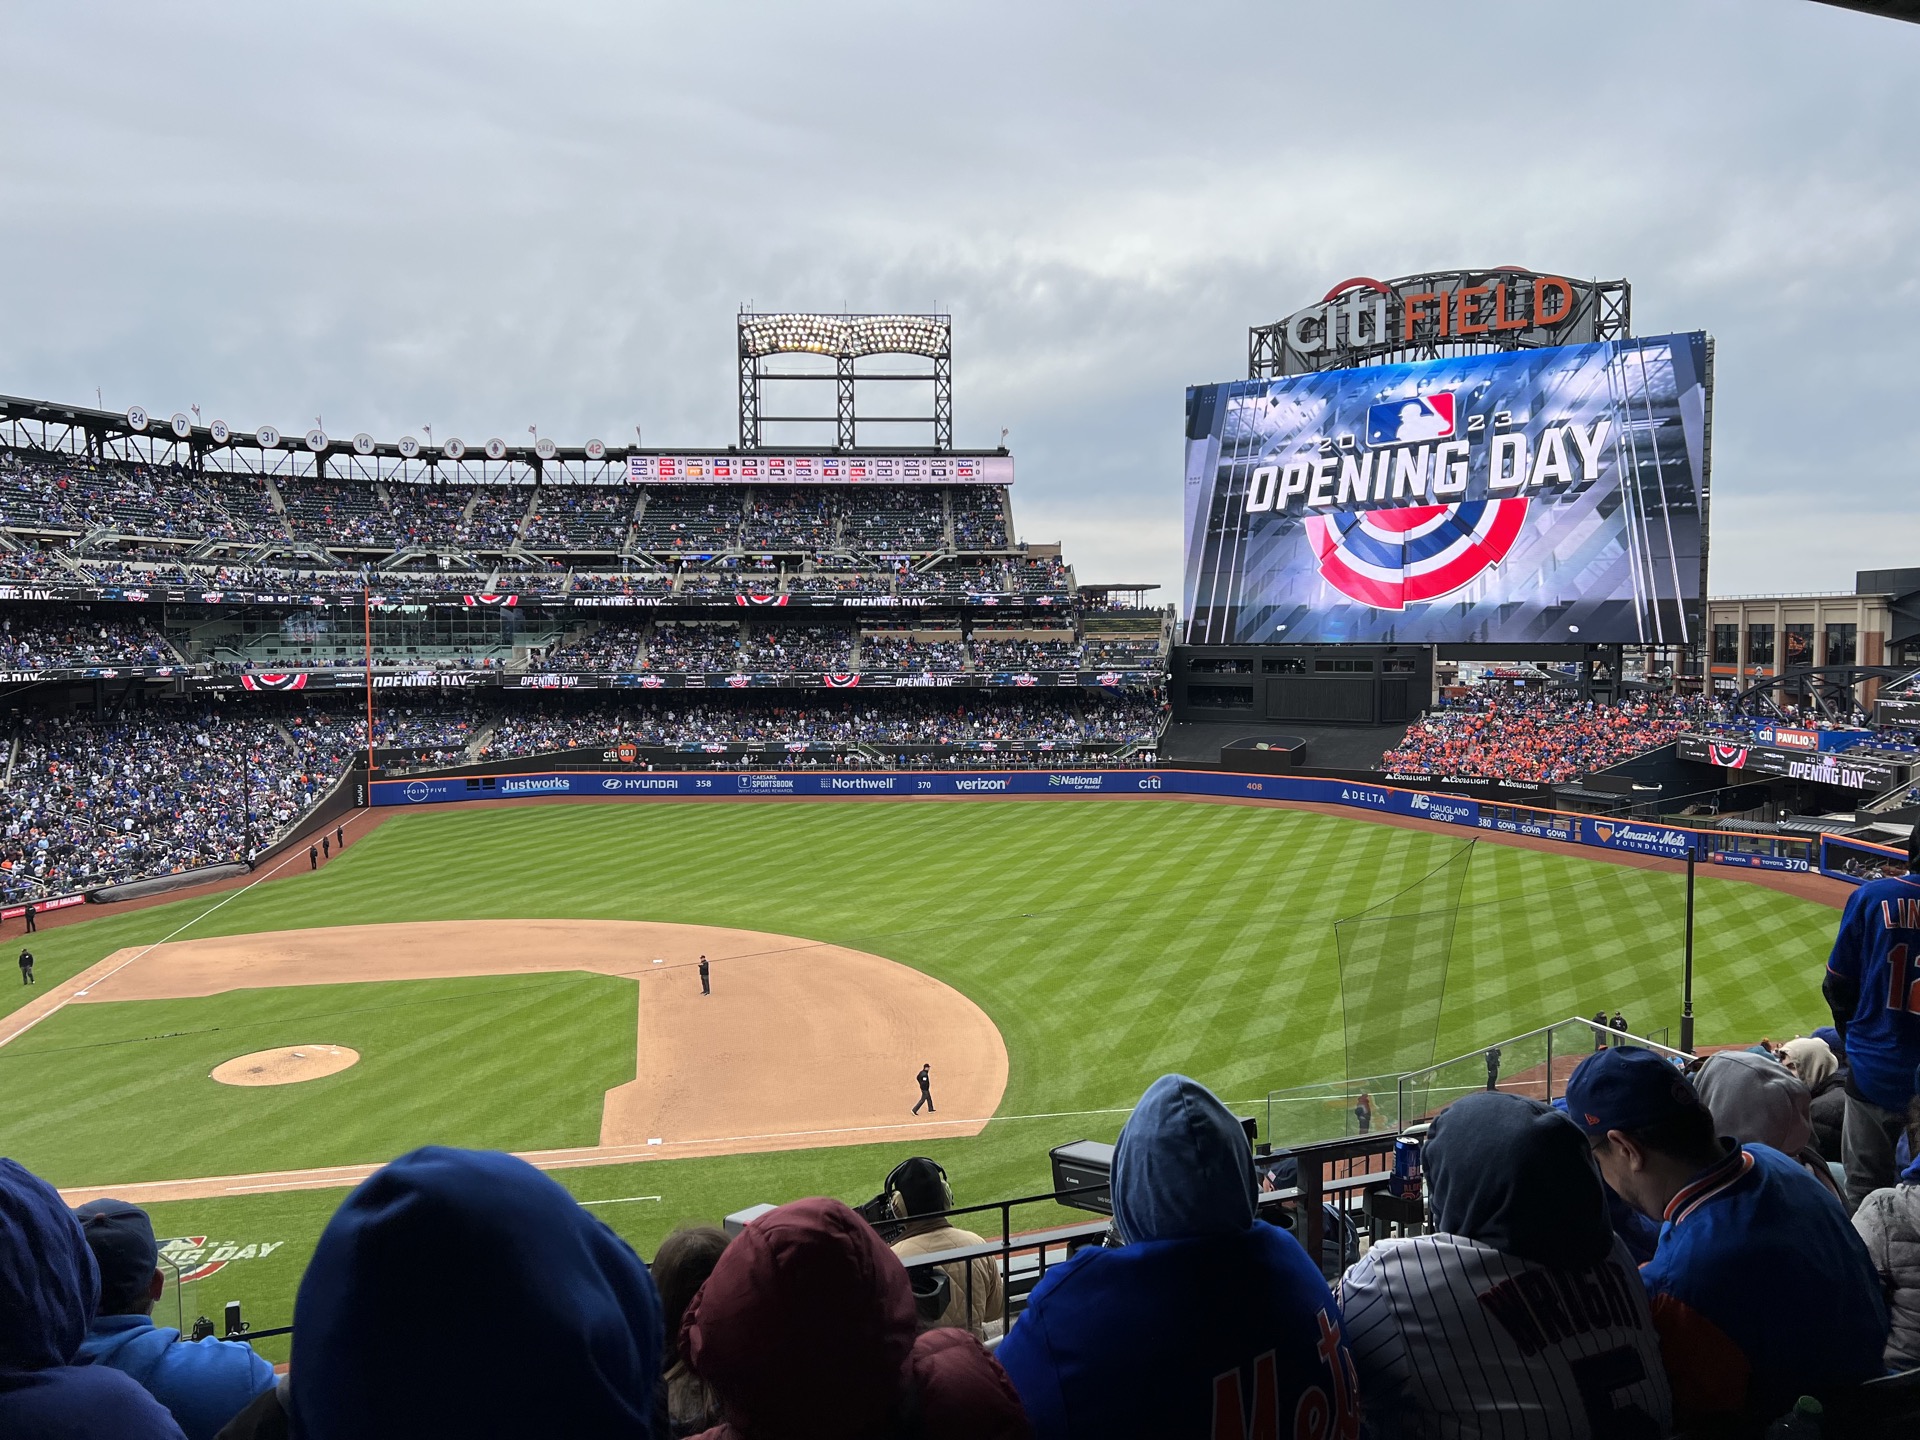 A rare night: The Mets make Citi Field a happy place with win over